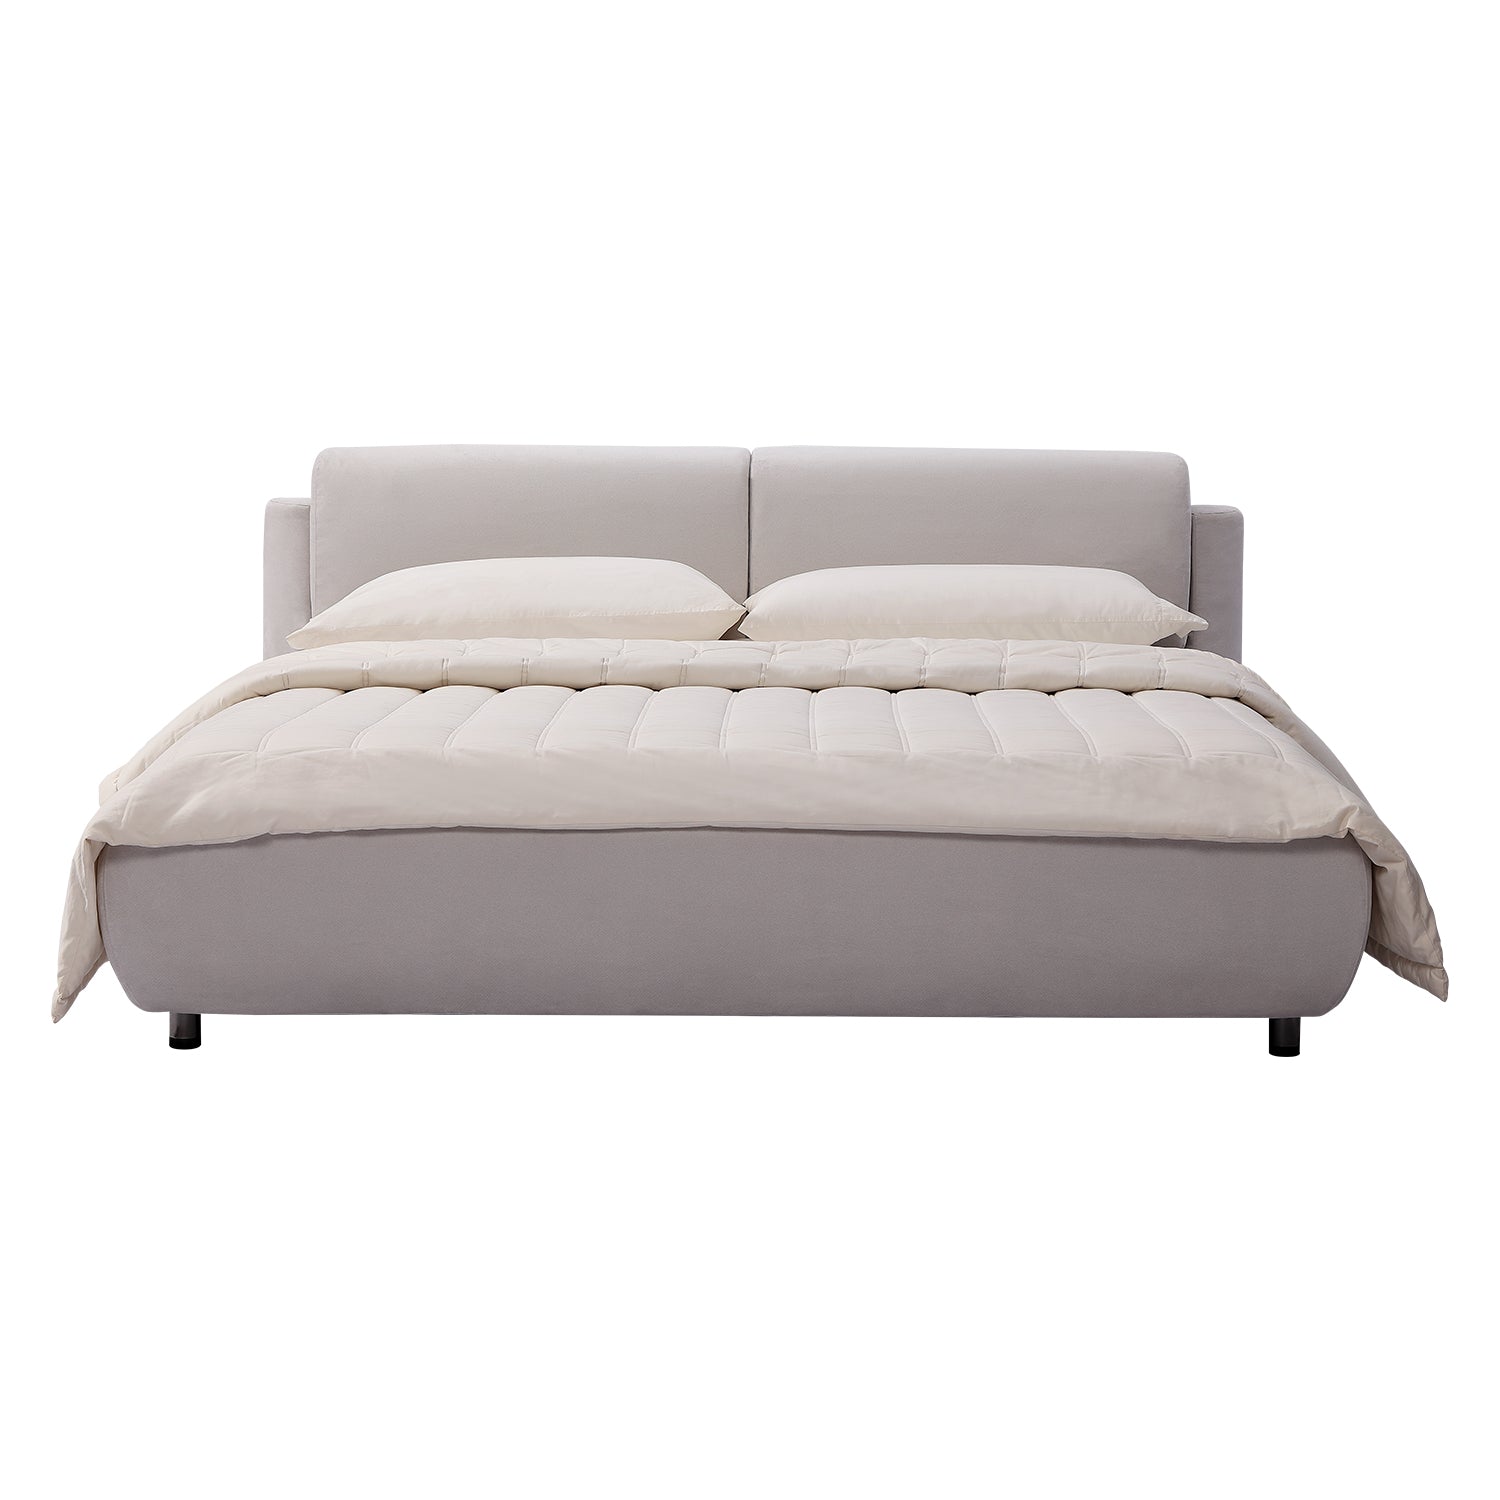 DeRUCCI Bed Frame BZZ4-082 with modern minimalist design, European-inspired shape, featuring a light grey upholstered headboard and frame, displayed with pillows and a comforter.